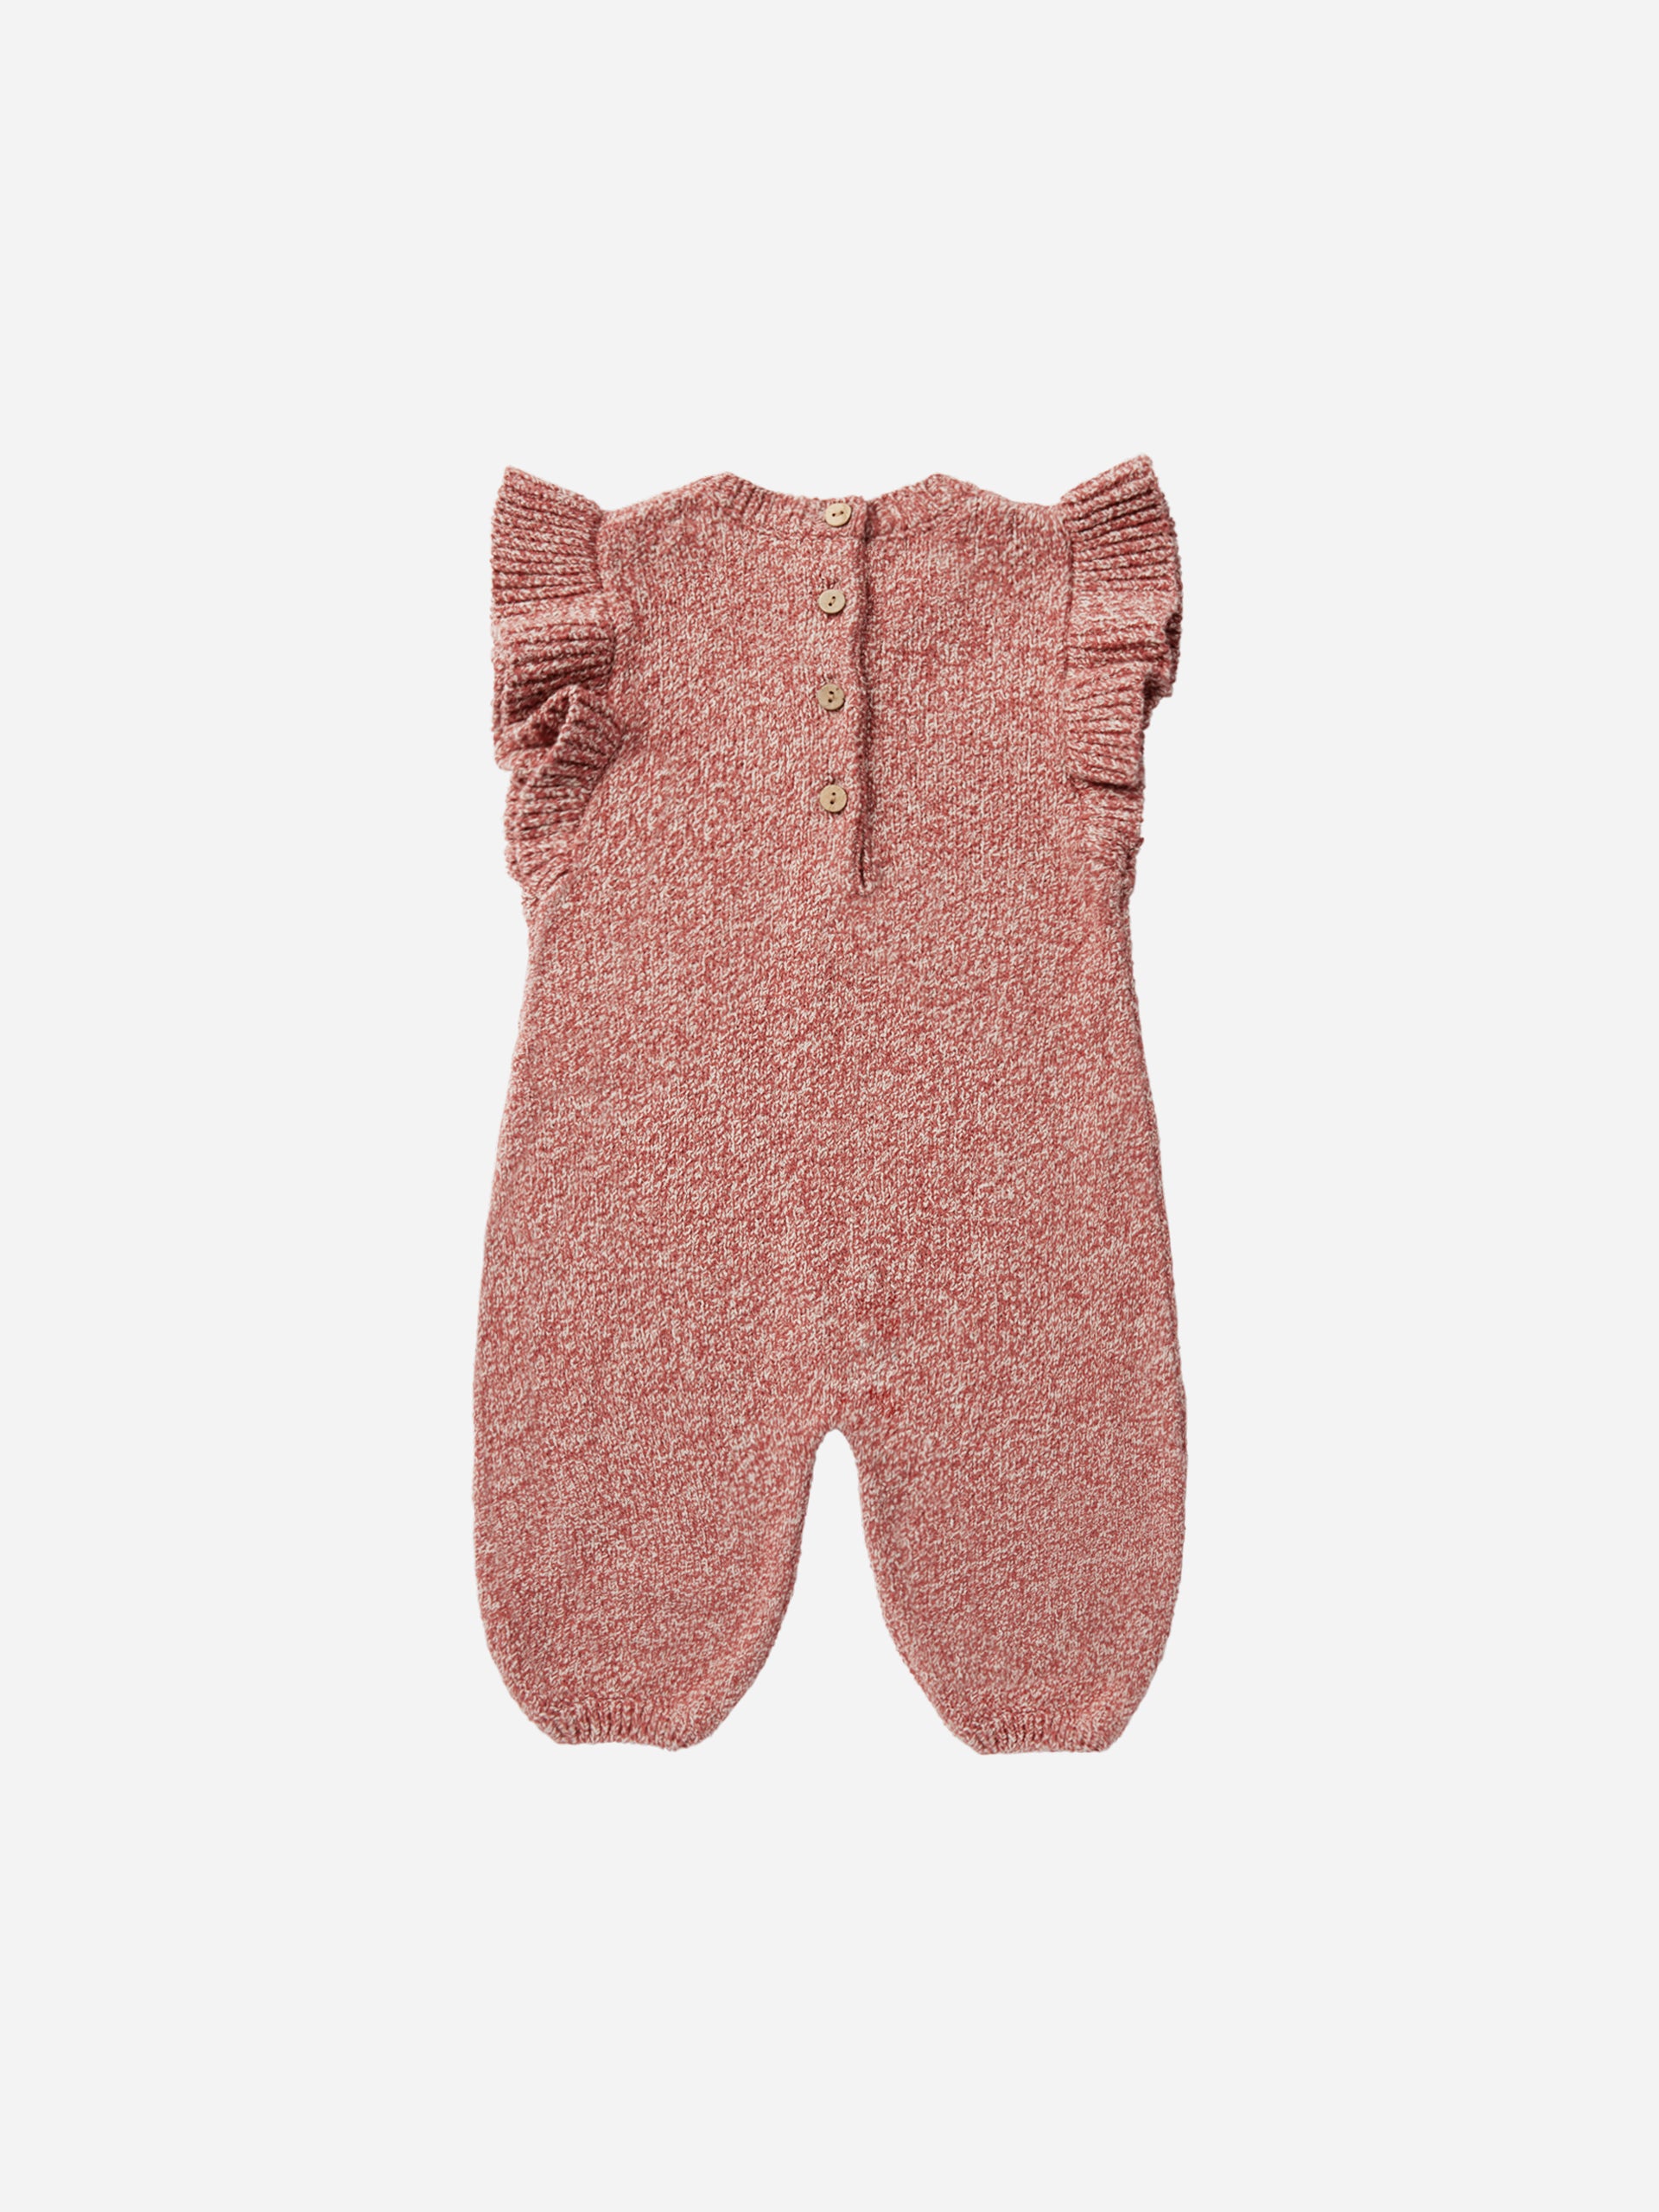 Stella Knit Jumpsuit || Heathered Strawberry - Rylee + Cru | Kids Clothes | Trendy Baby Clothes | Modern Infant Outfits |